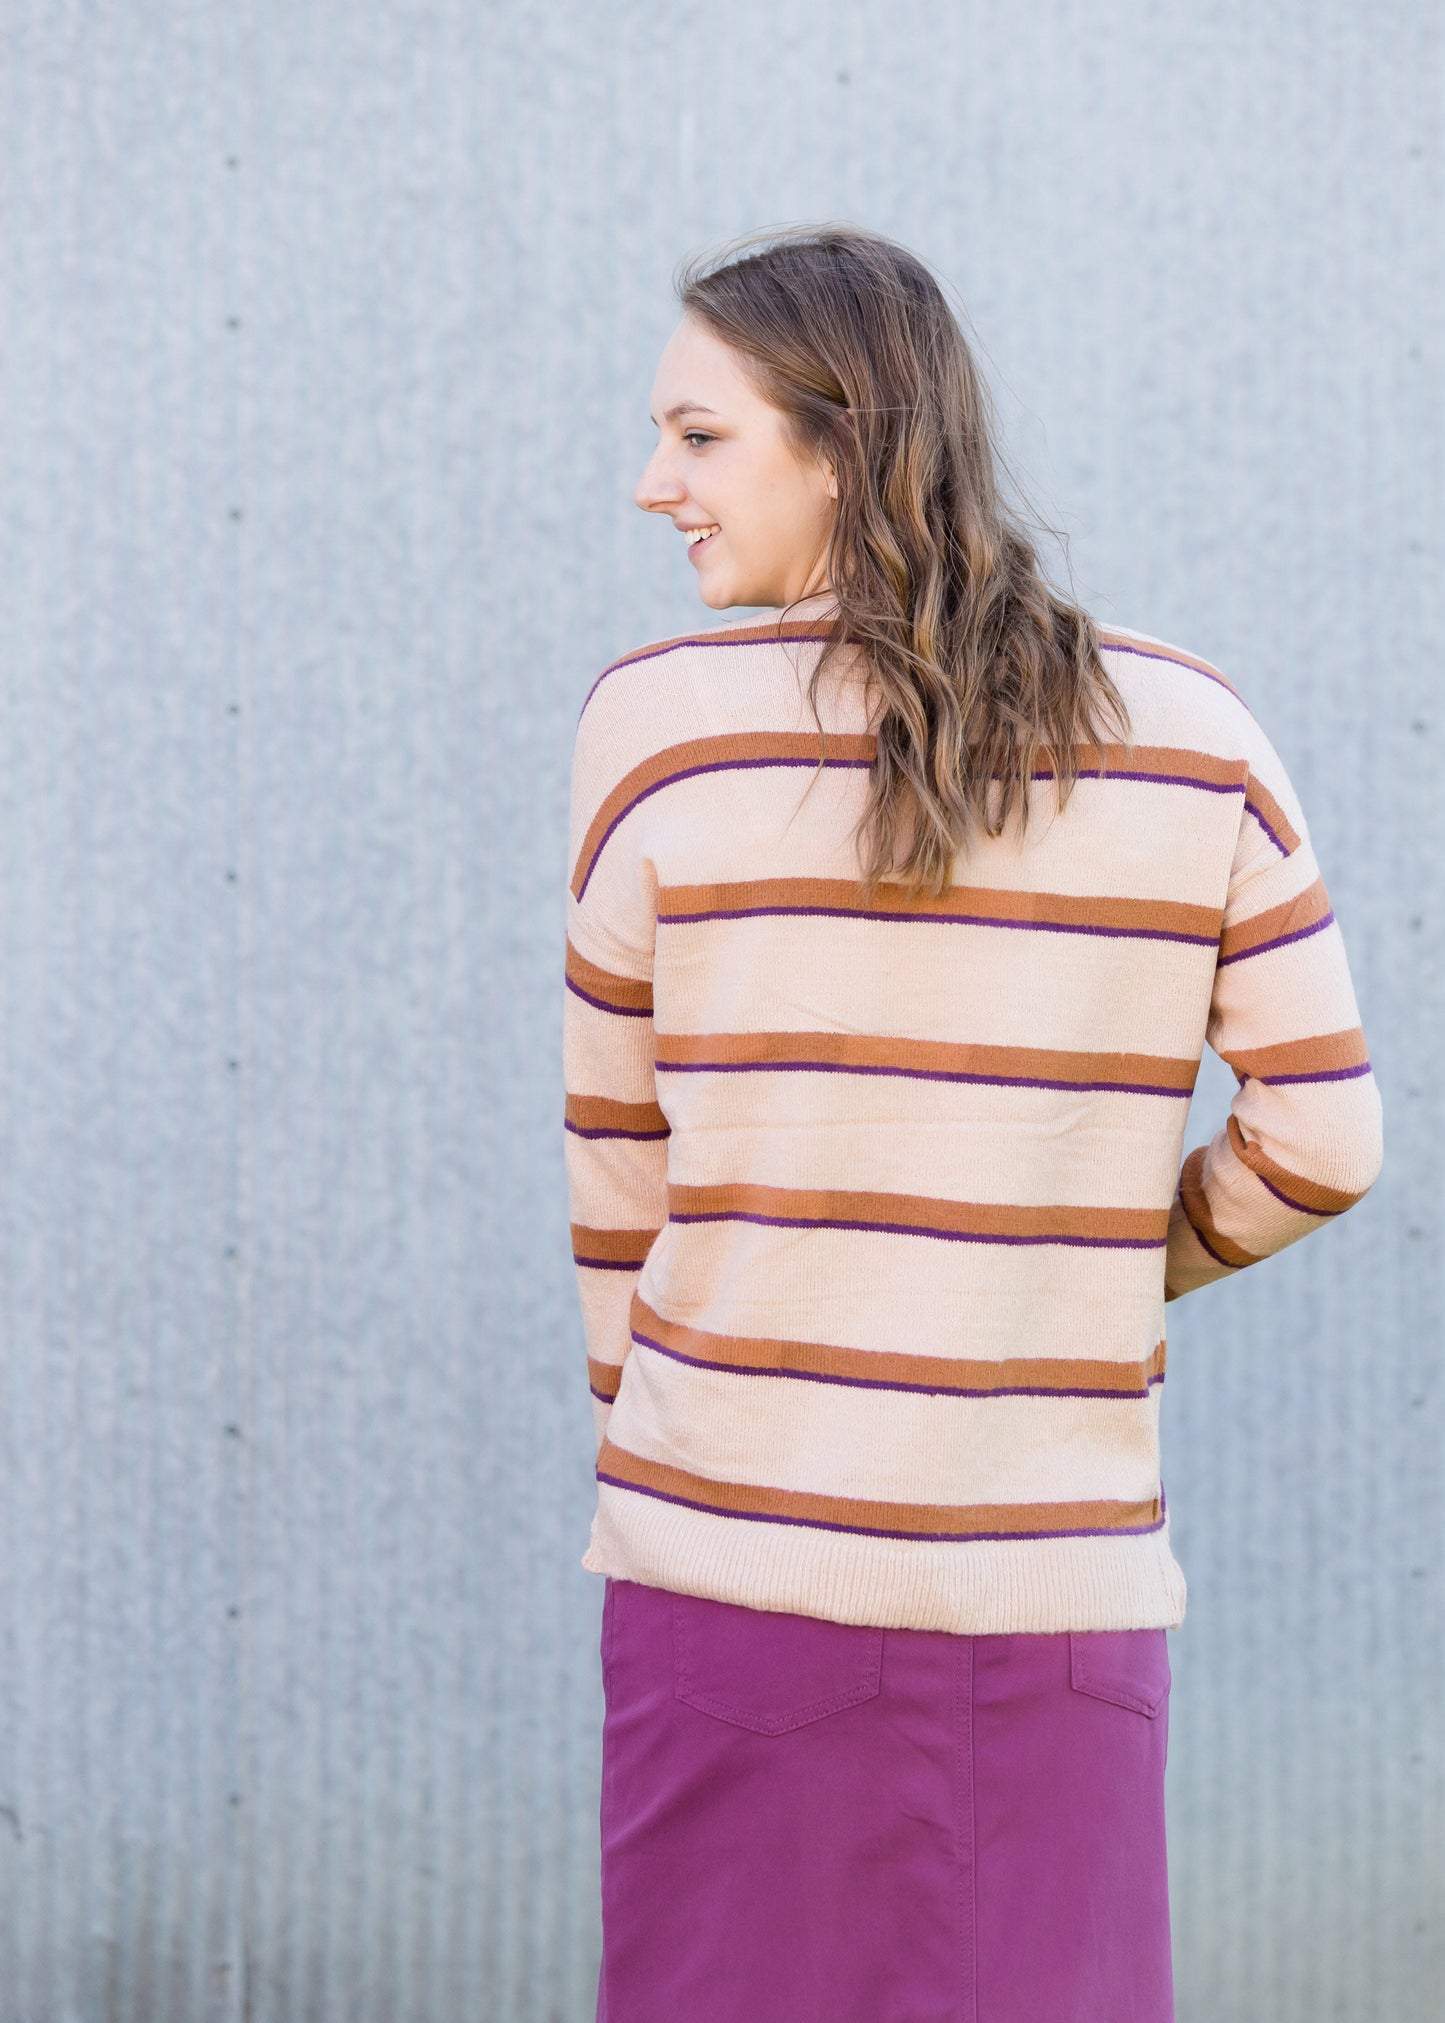 Pullover Striped Cozy Sweater - FINAL SALE Tops